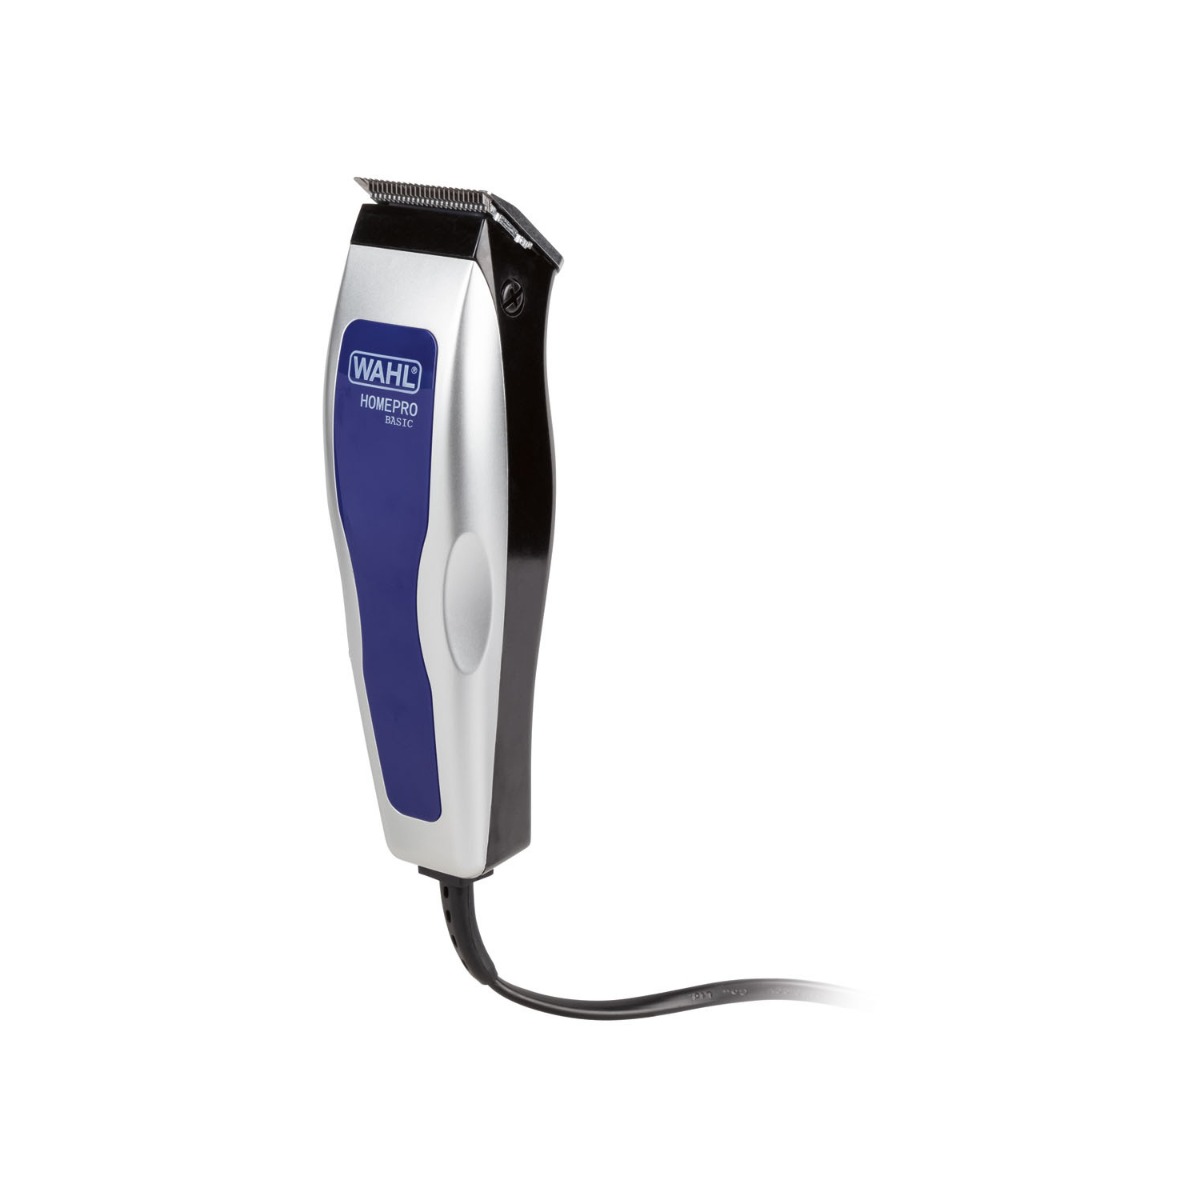 WAHL 09155-1216 HomePro Basic Clipper WAHL